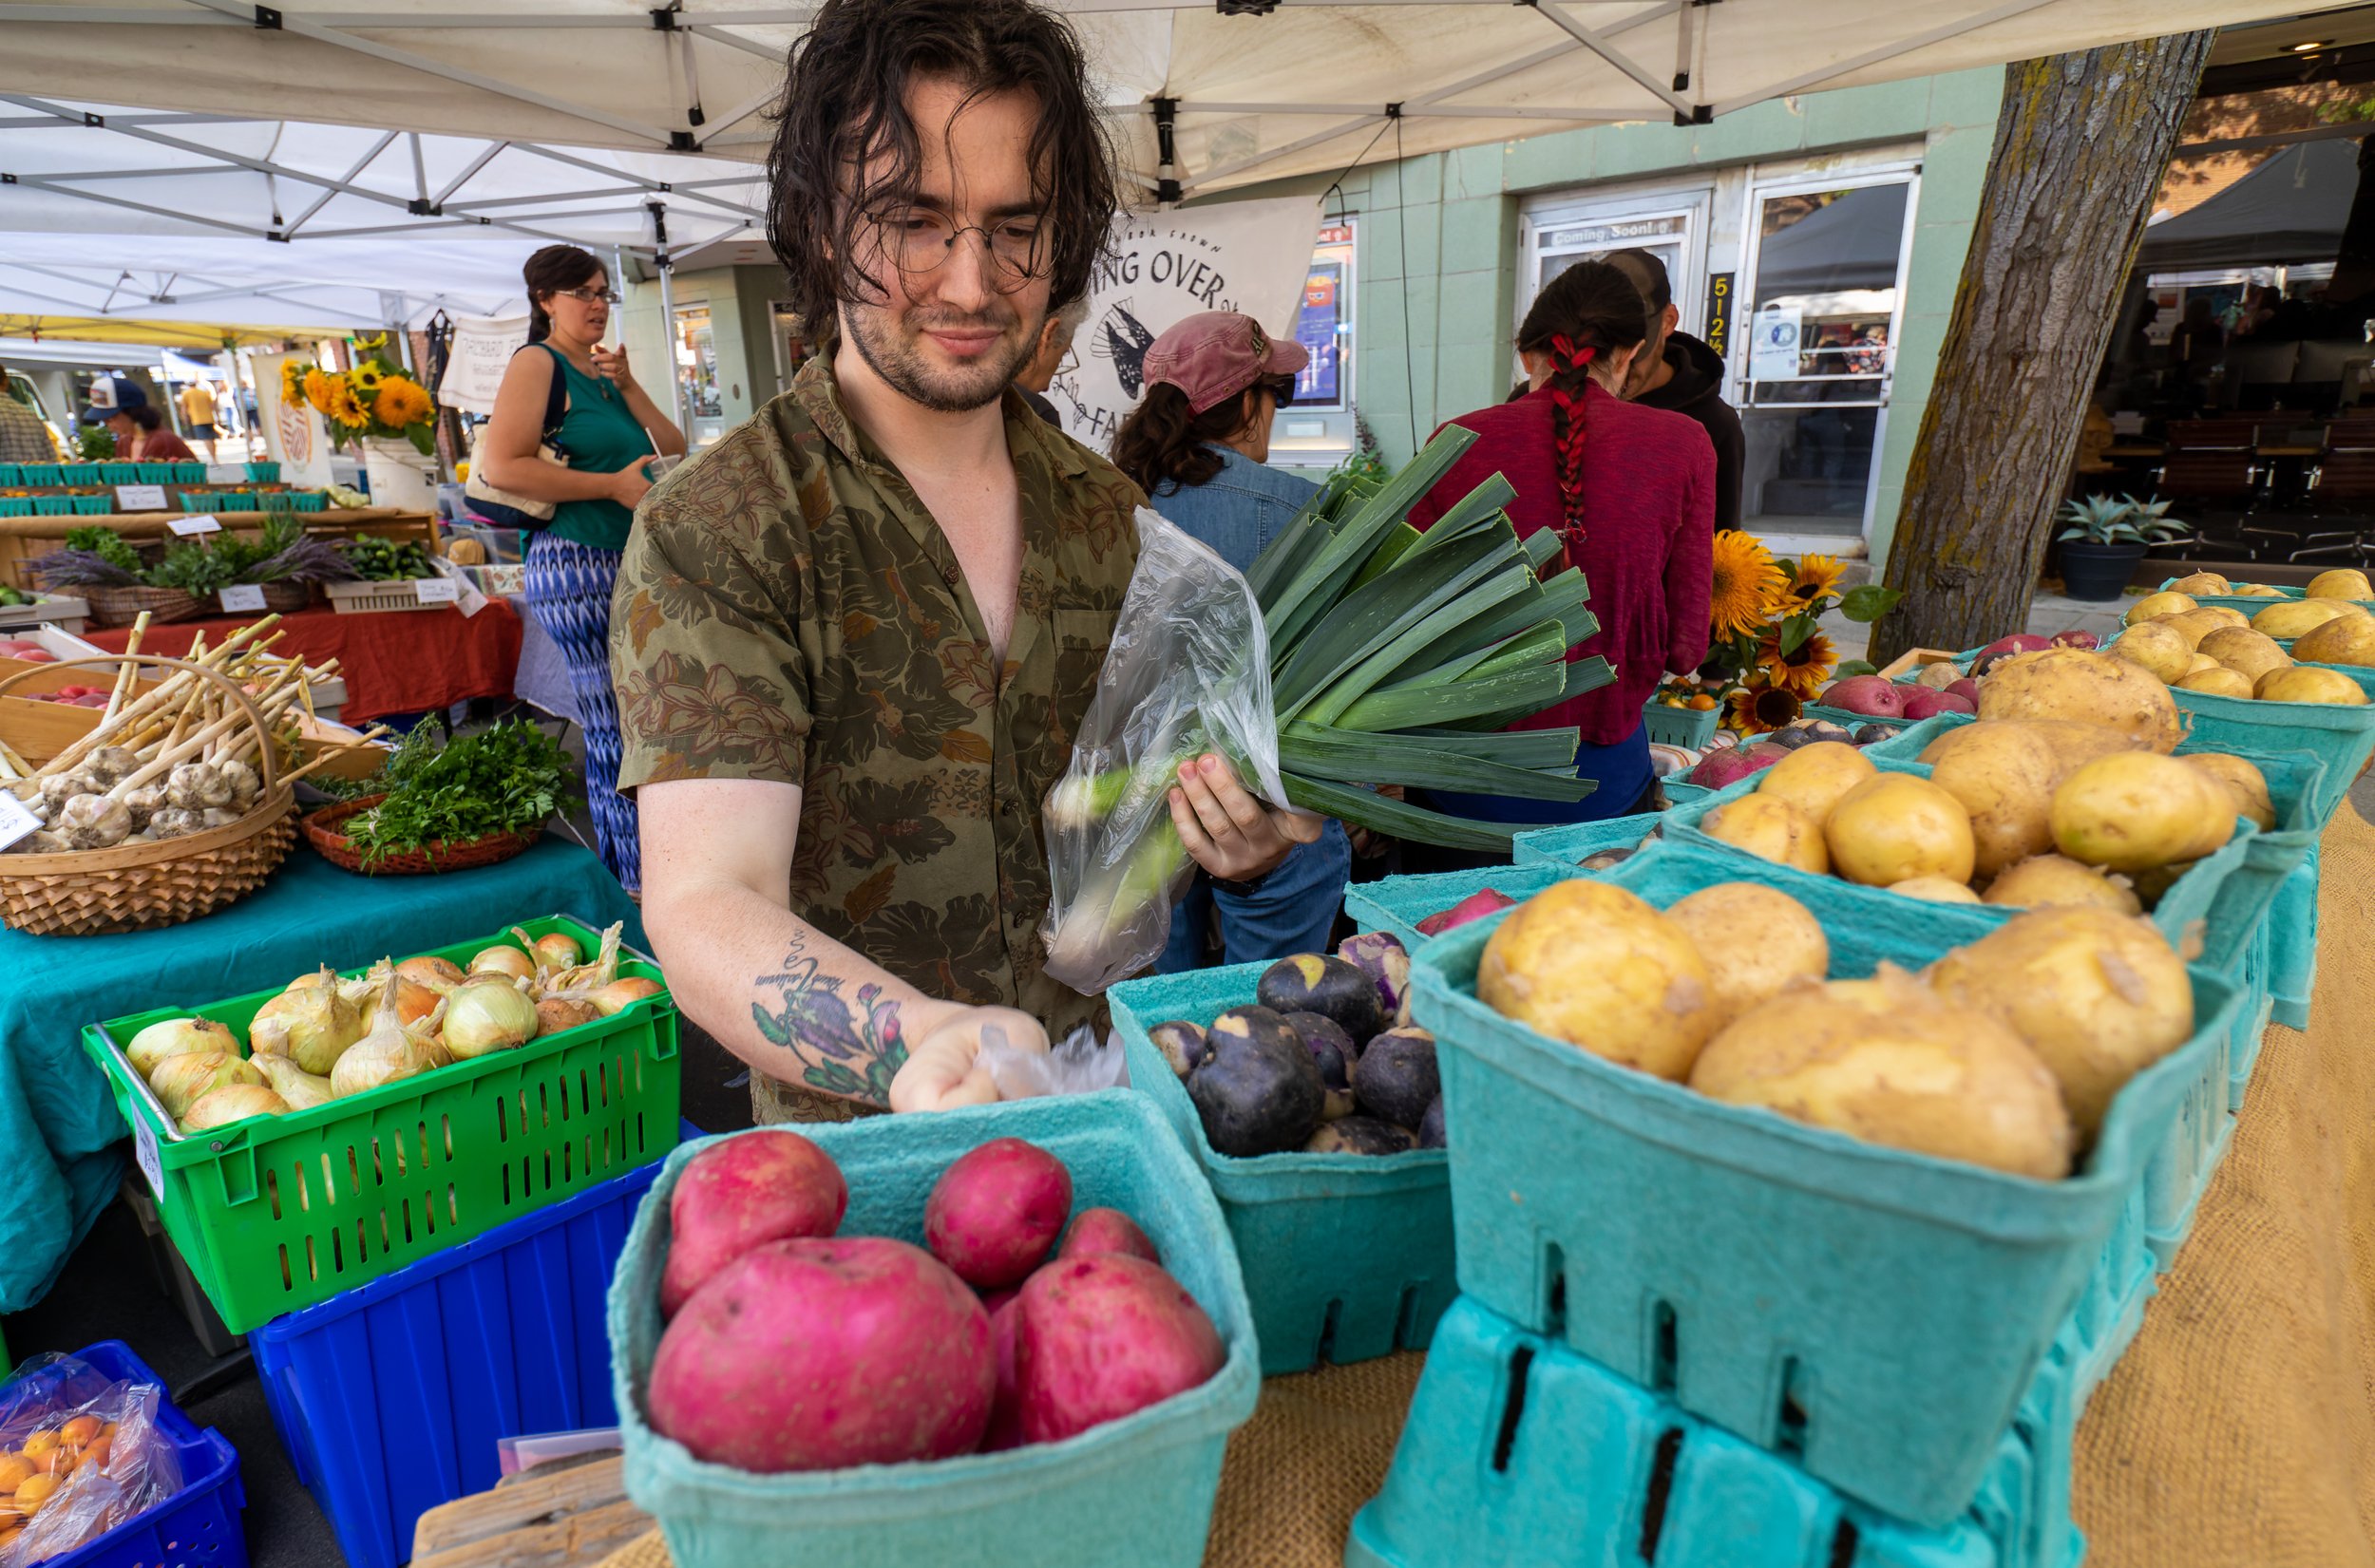 Pecoraro buys produce from Wing Over Farm at the Moscow Farmers Market